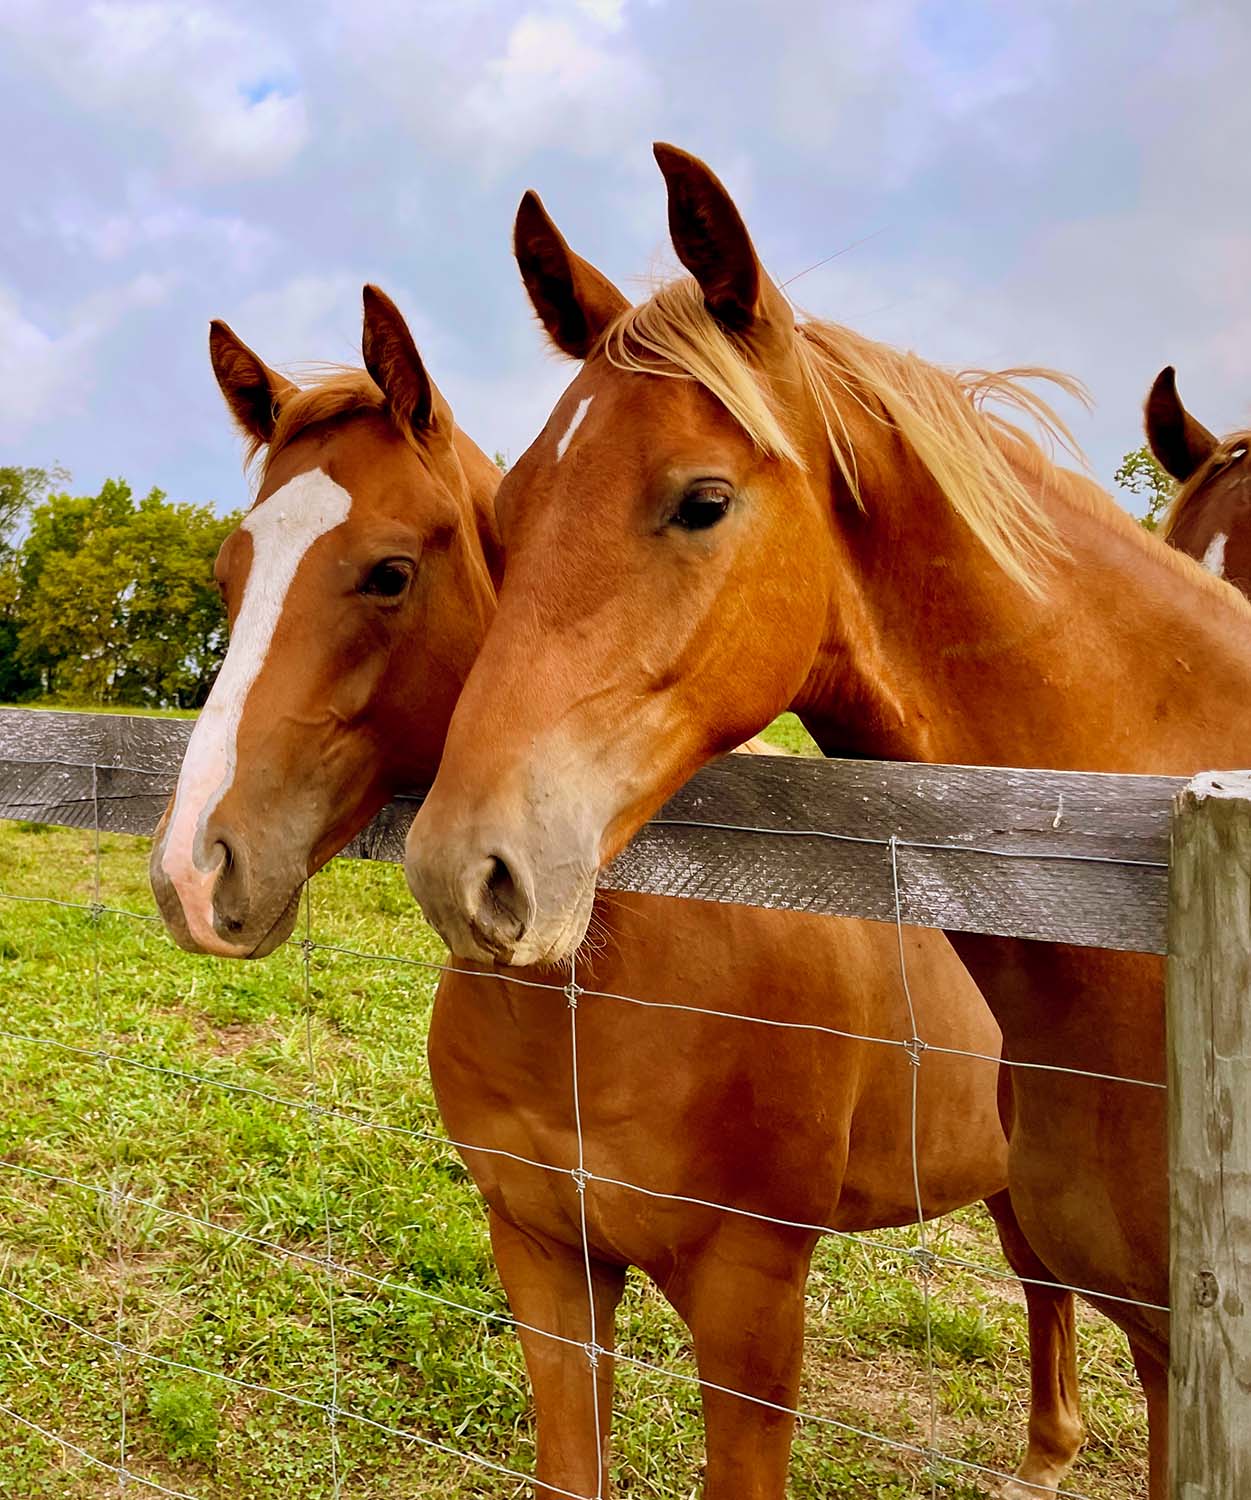 Two horses at fence